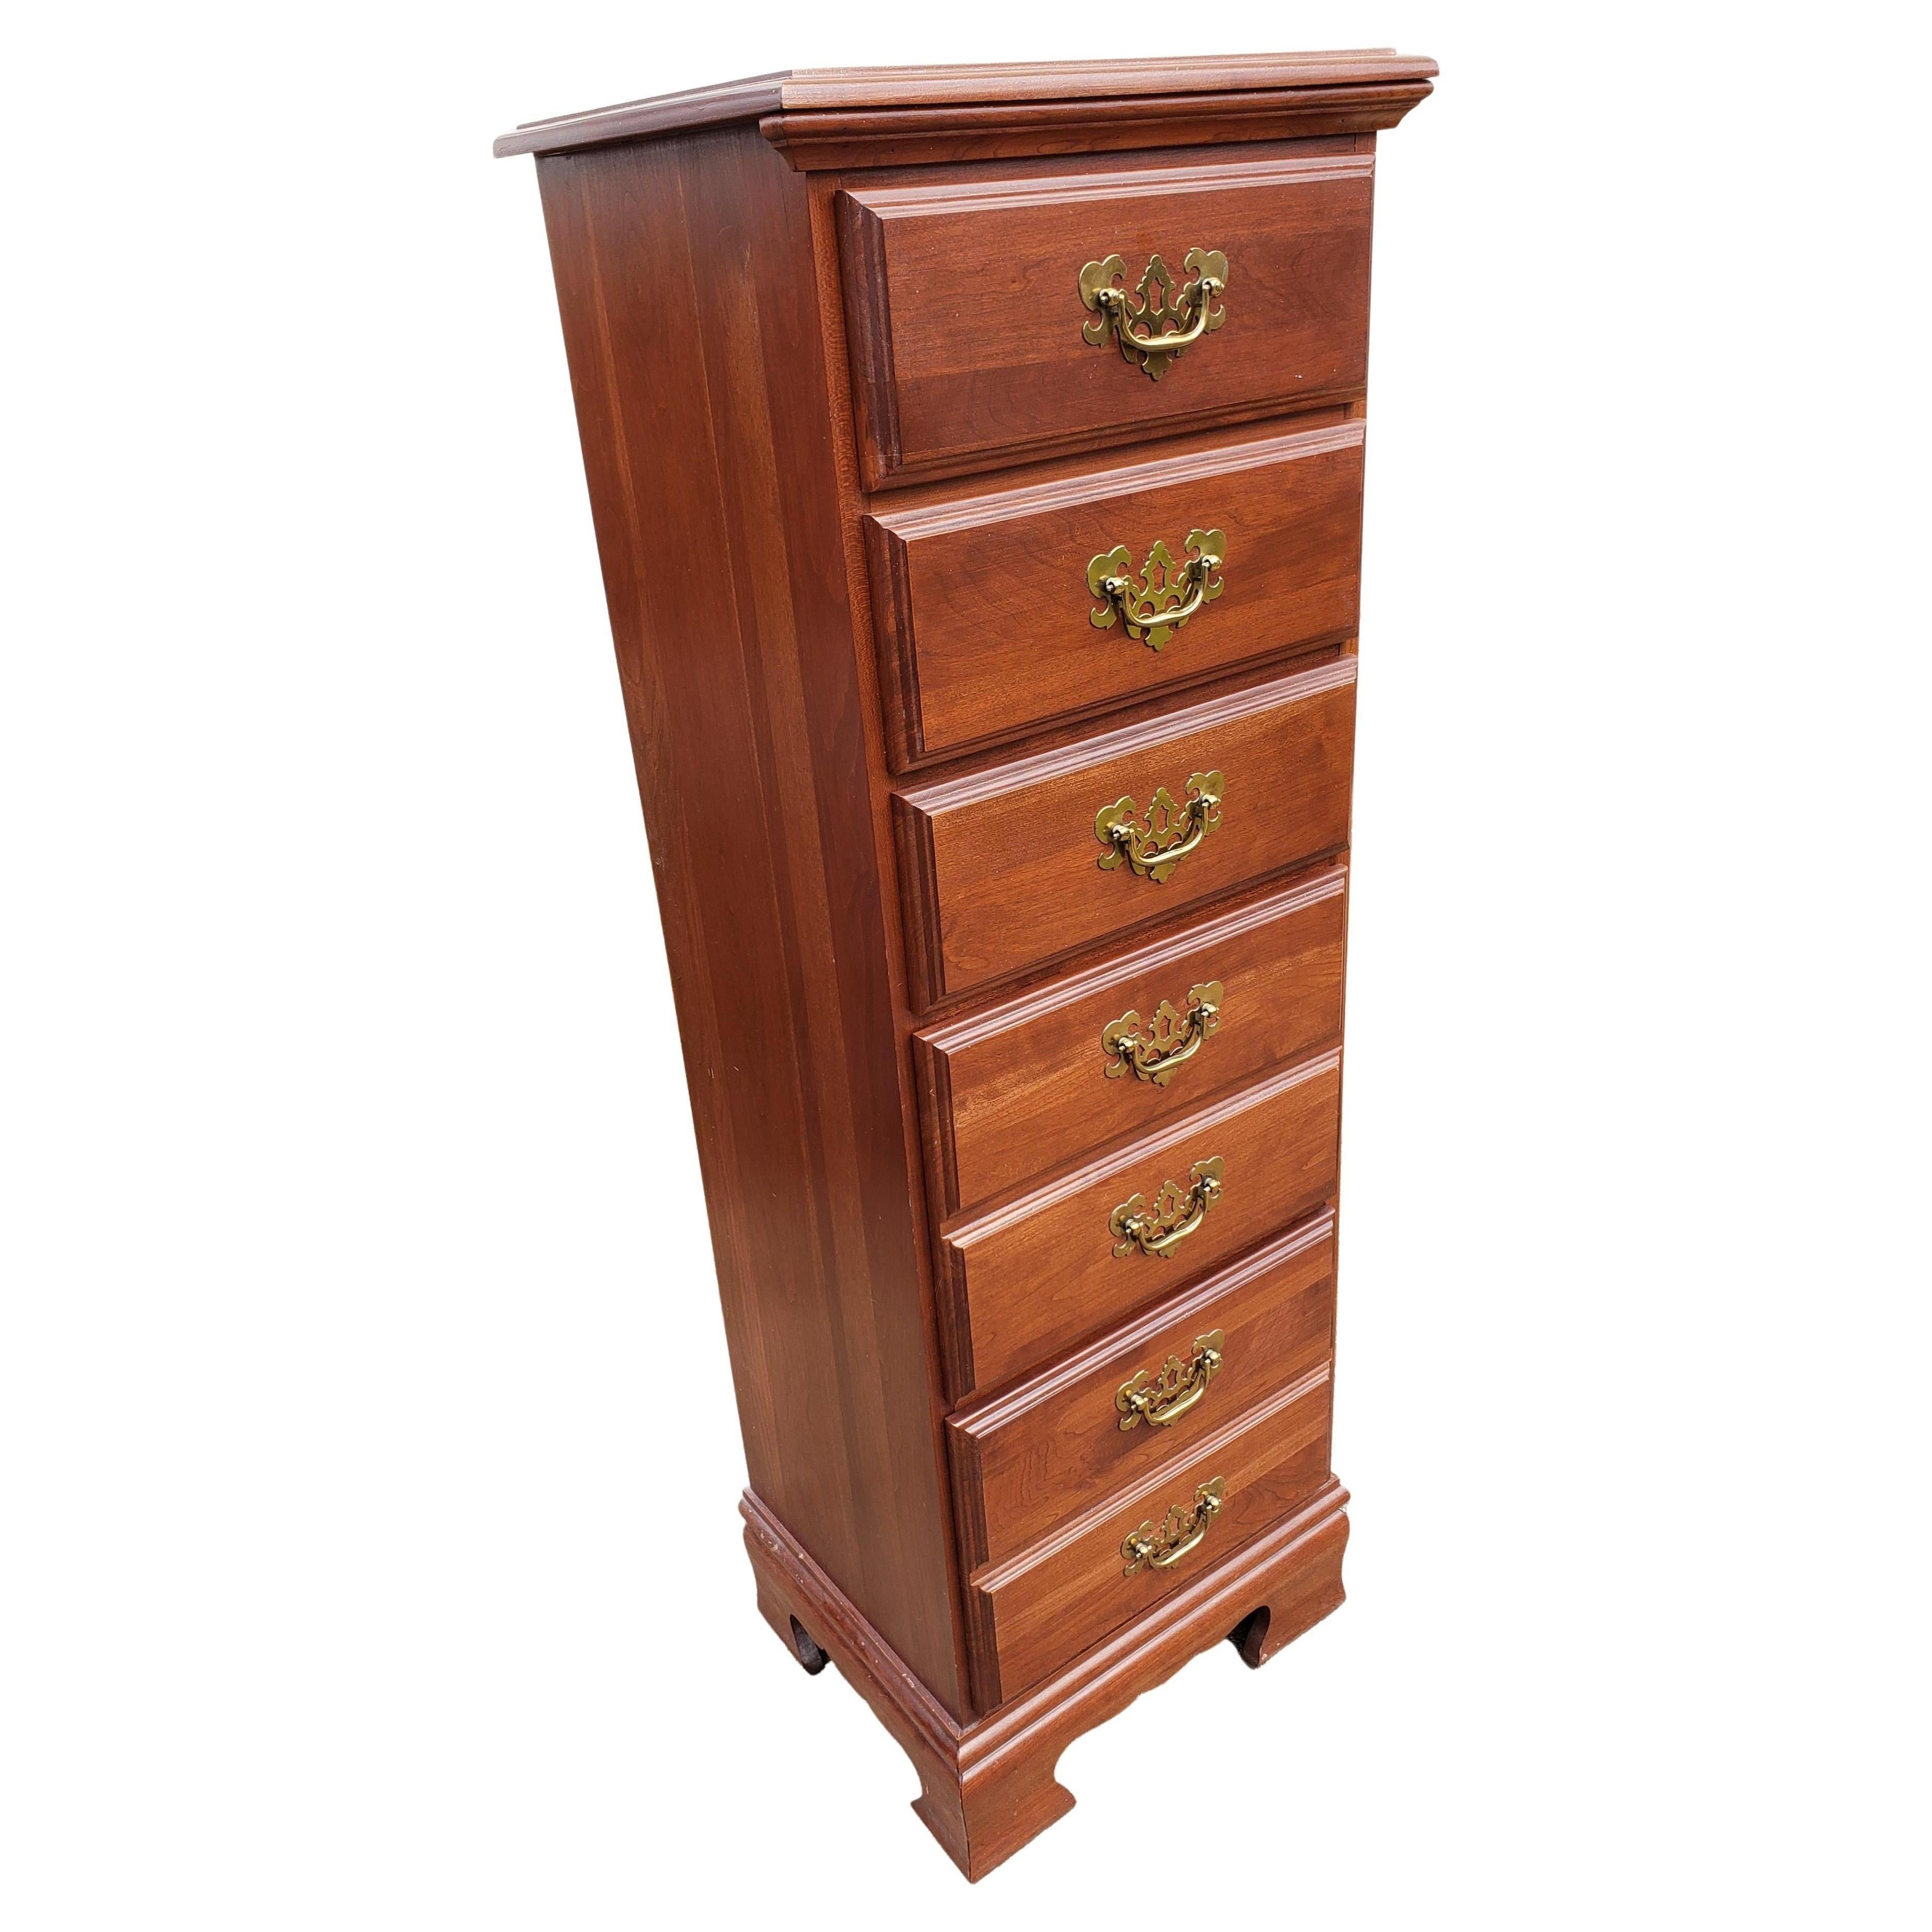 What is a chest of drawers called?